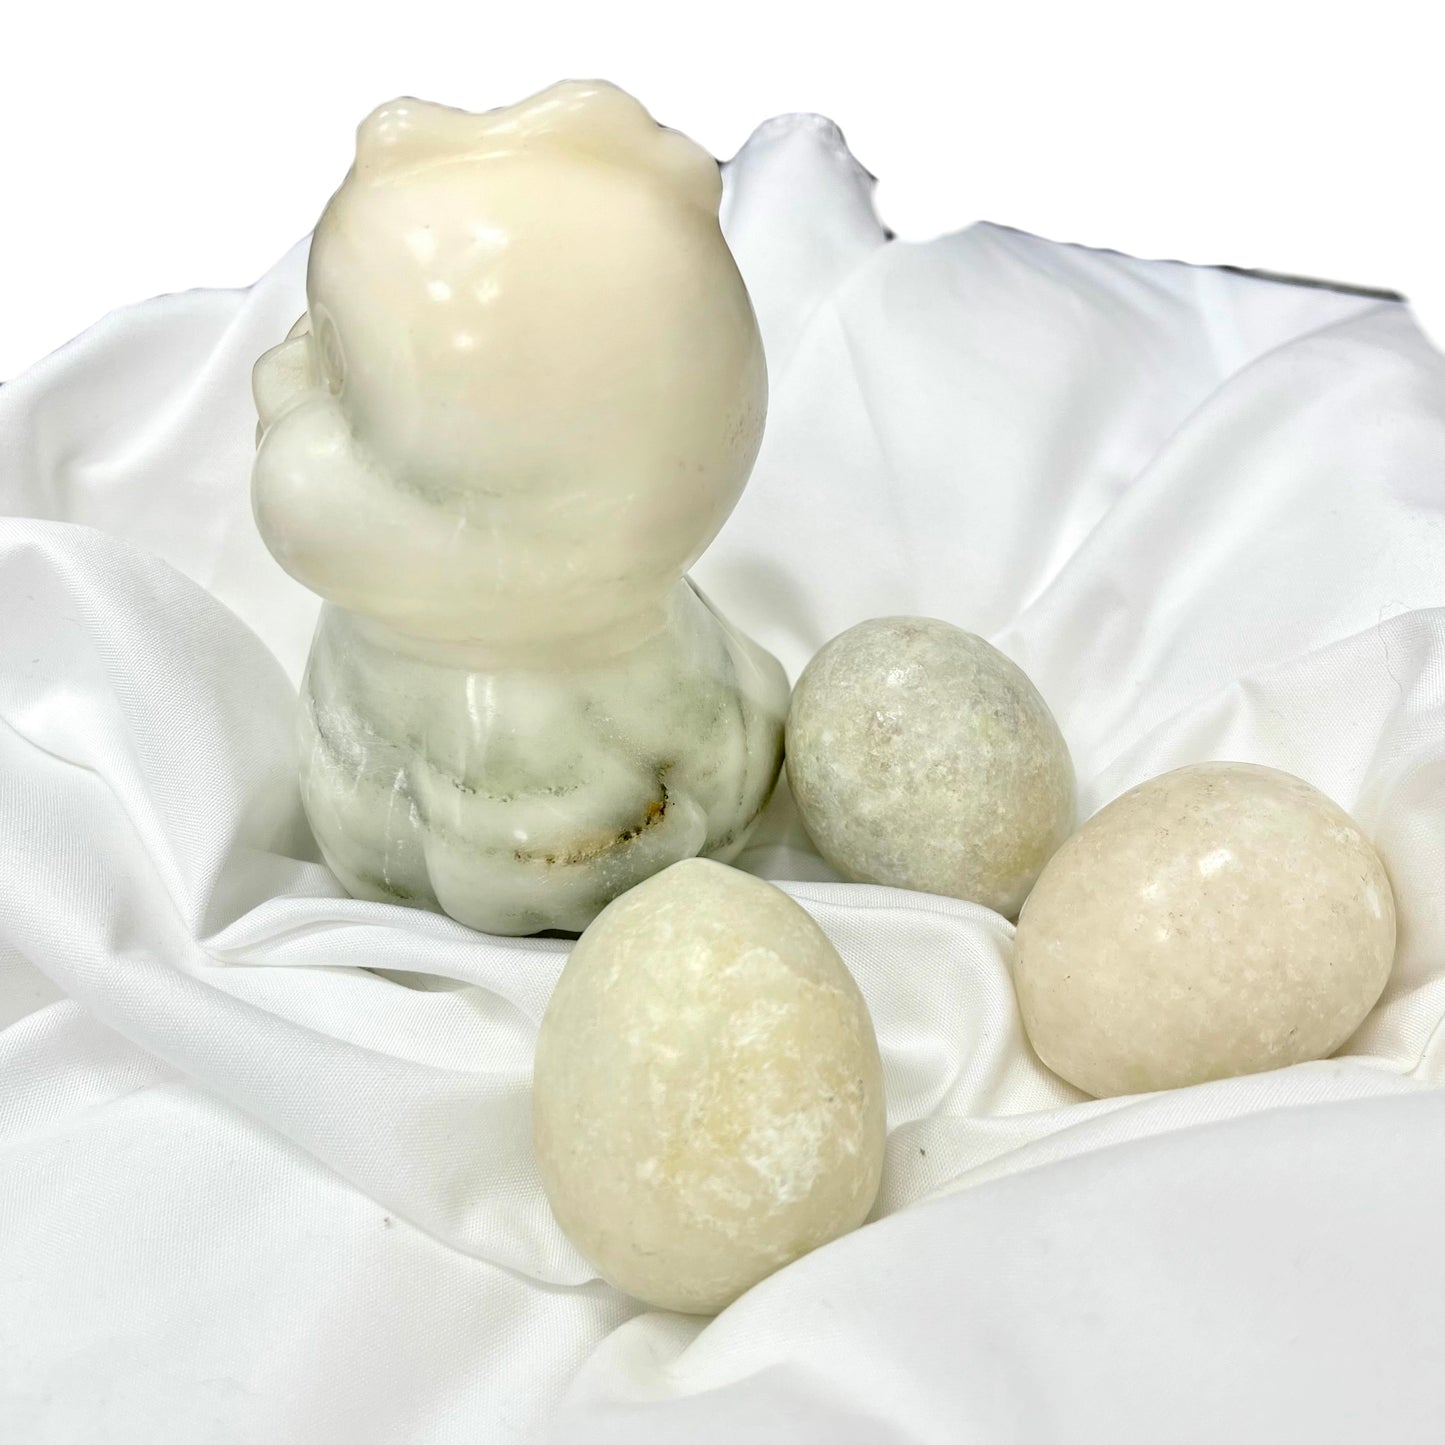 【A11】Meowcrystal Natural Turkish Black Pattern White Jade Stone Interesting Chicken and Egg Carving [Natural pattern is unique, please note when ordering if you need no pattern or special pattern]